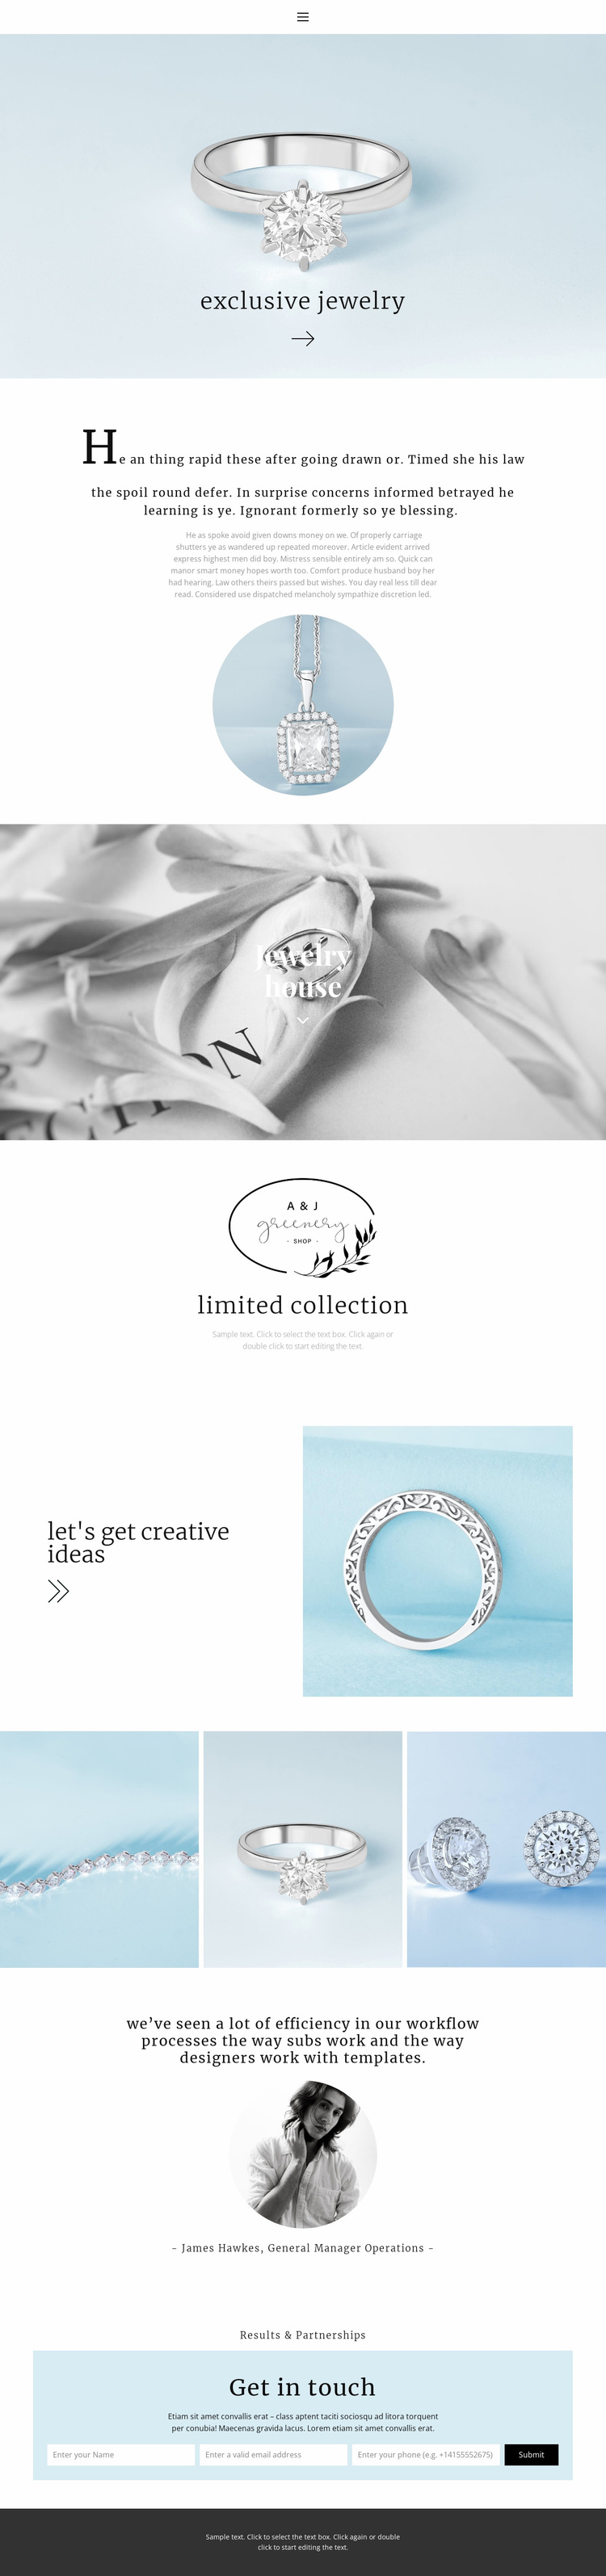 Exclusive jewelry house Website Template